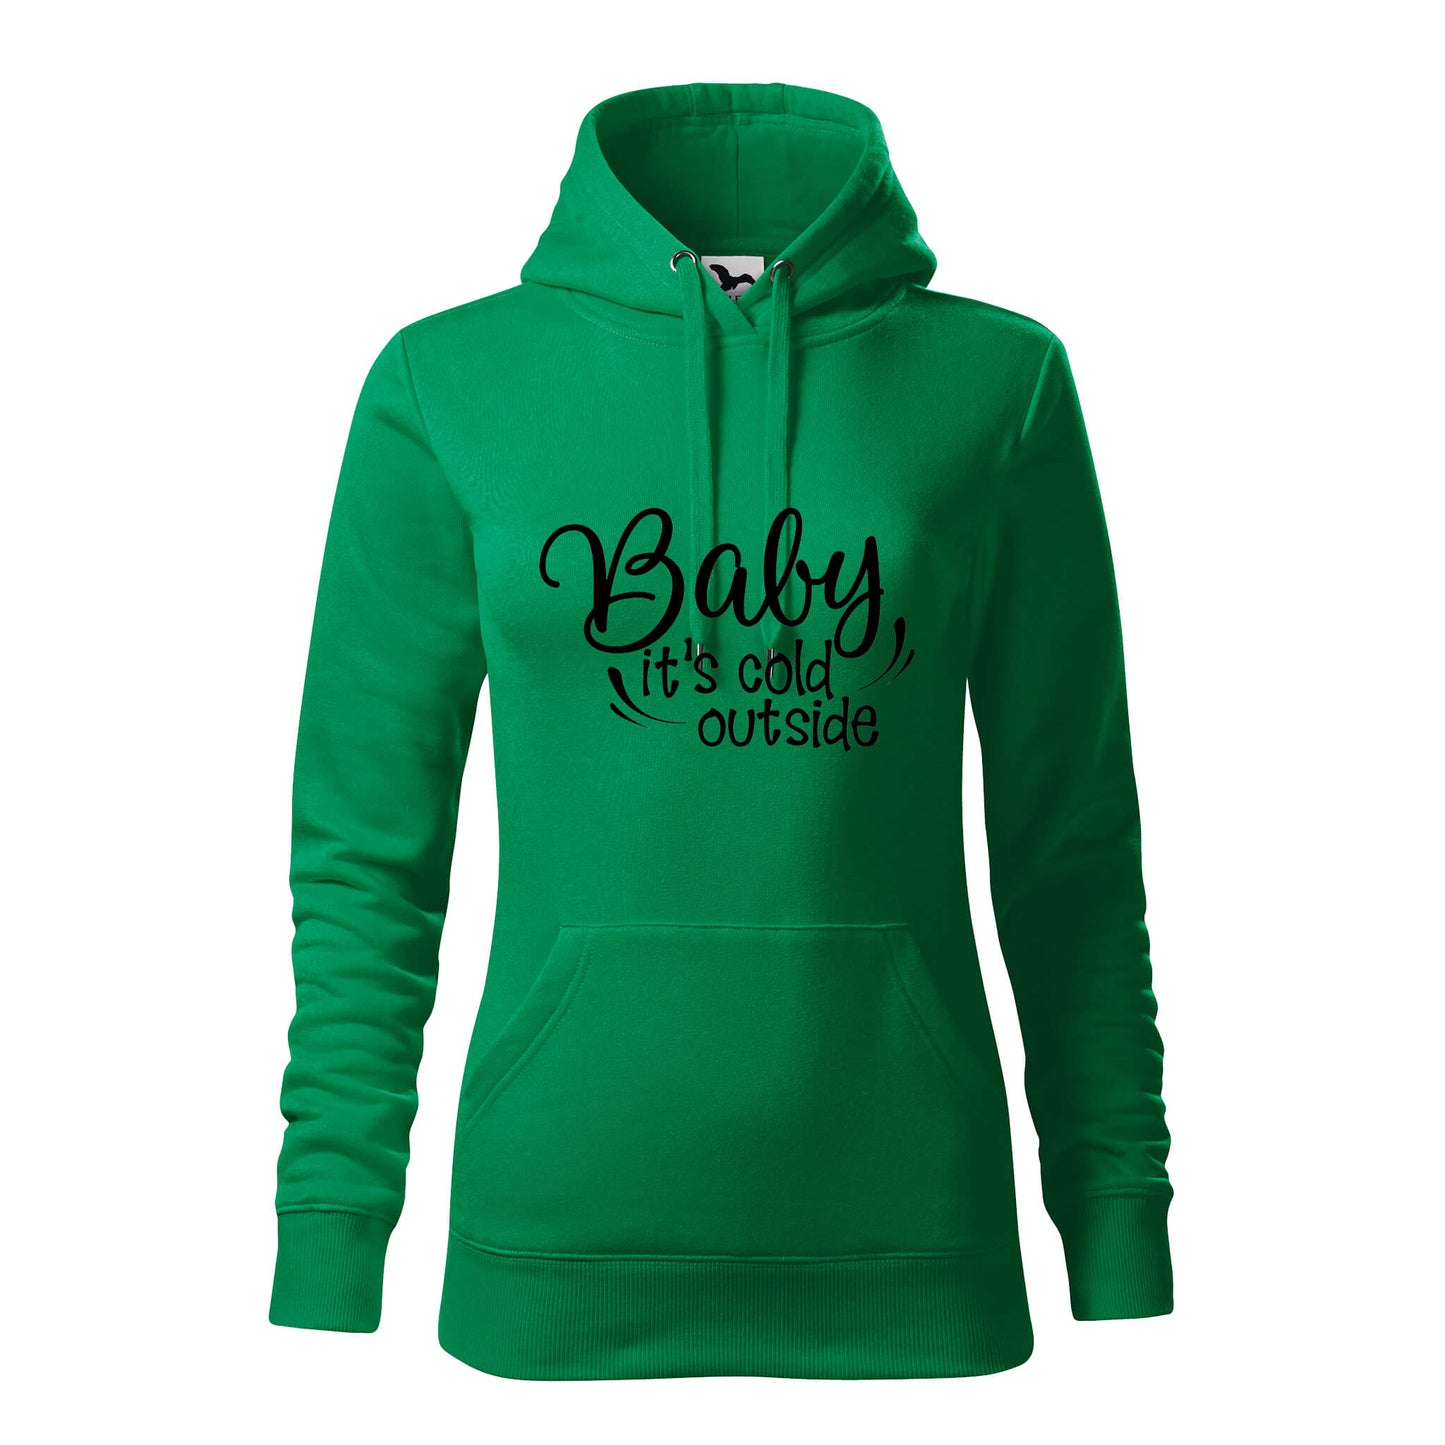 Baby its cold outside hoodie - rvdesignprint